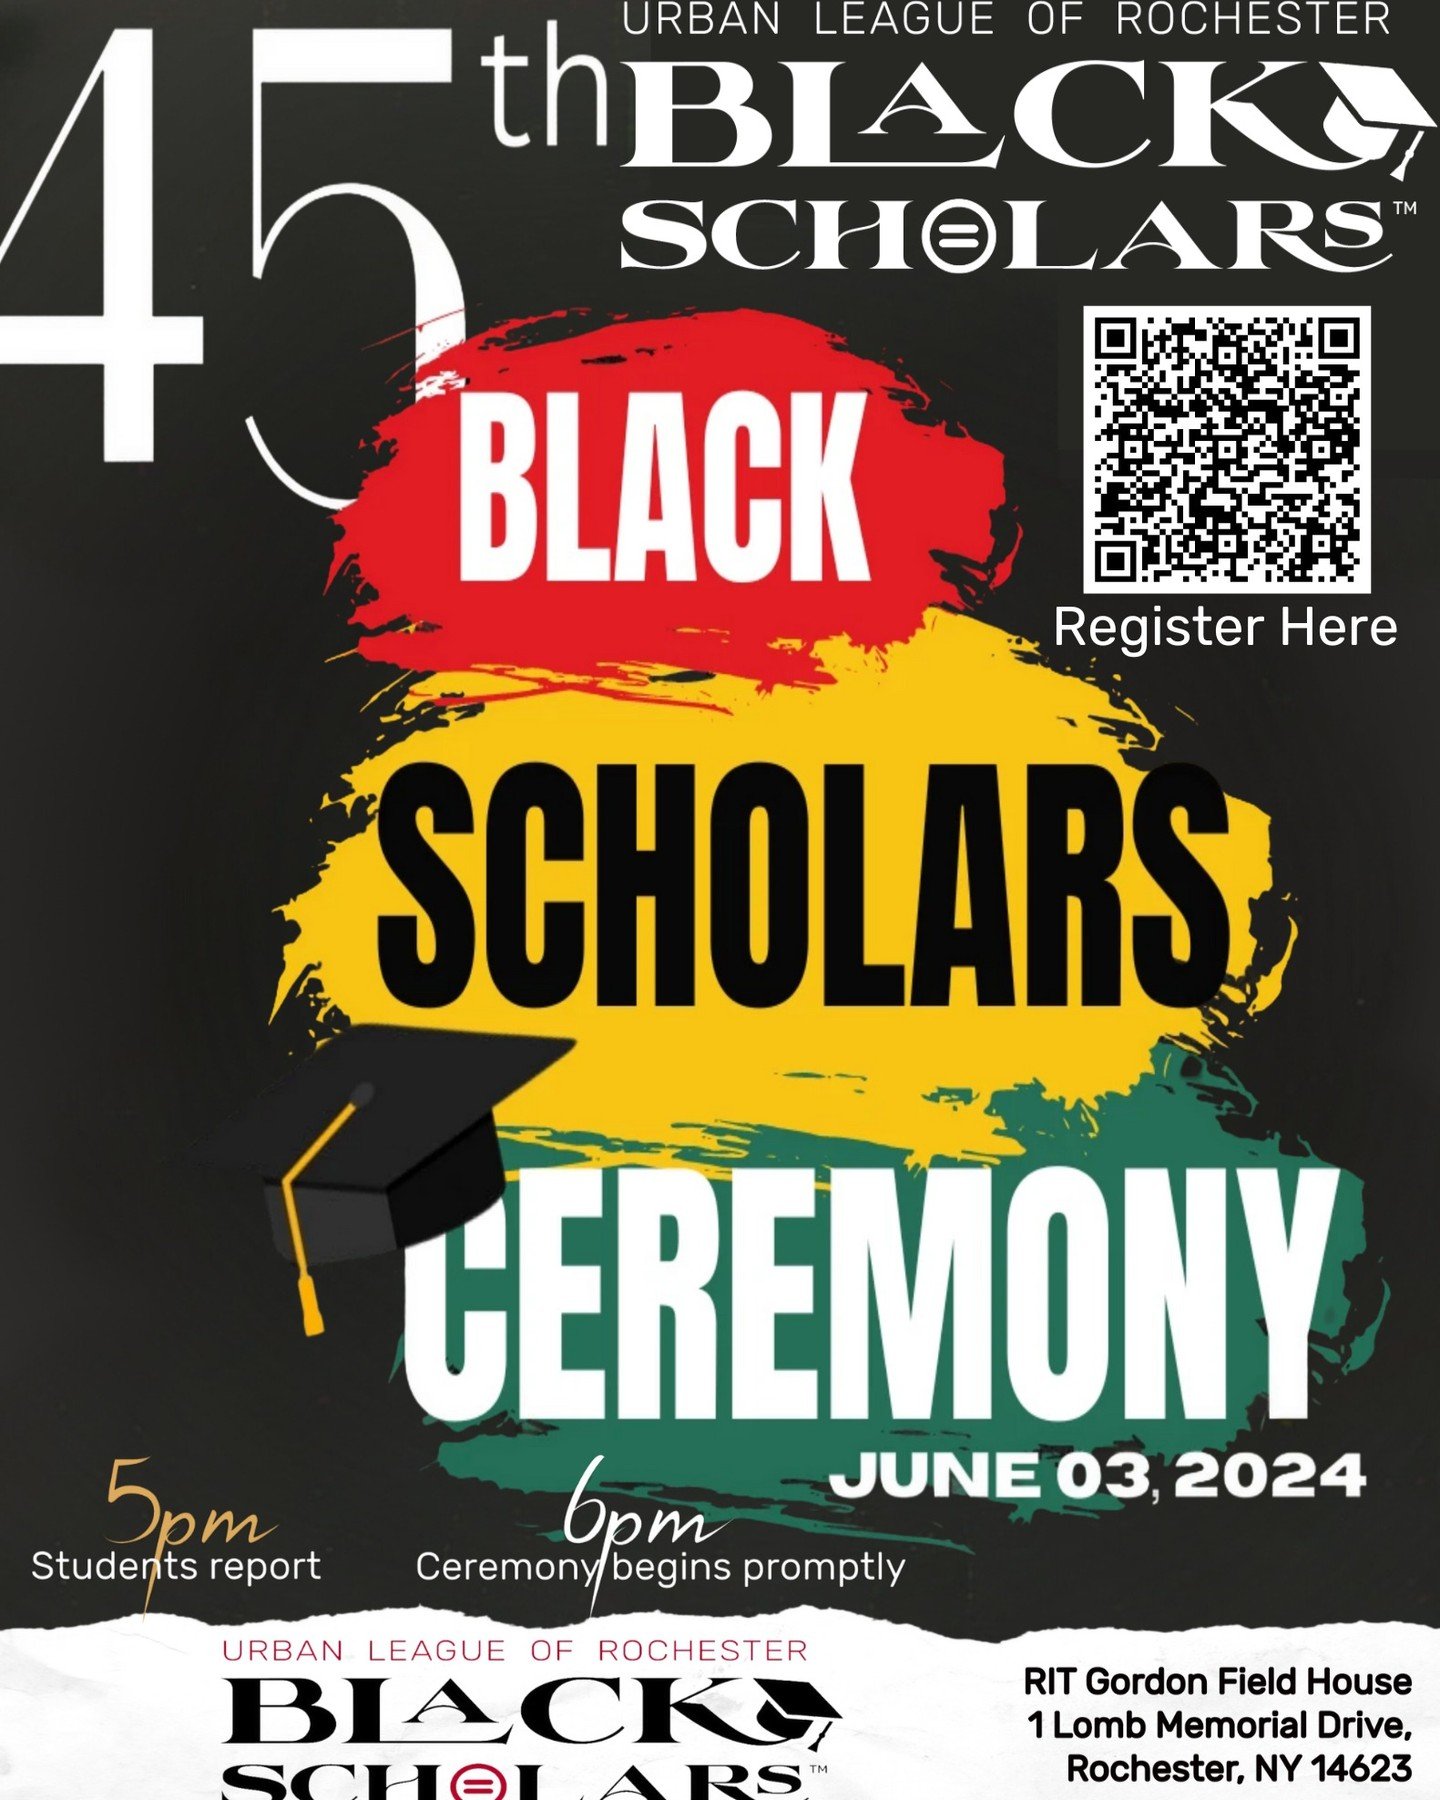 Our 45th annual Salute to Black Scholars Ceremony is Monday, June 3 at RIT's Gordon Field House. Tickets are FREE, but registration is required. Help us celebrate the academic accomplishments of over 600 students (!!!) and get your tickets today!